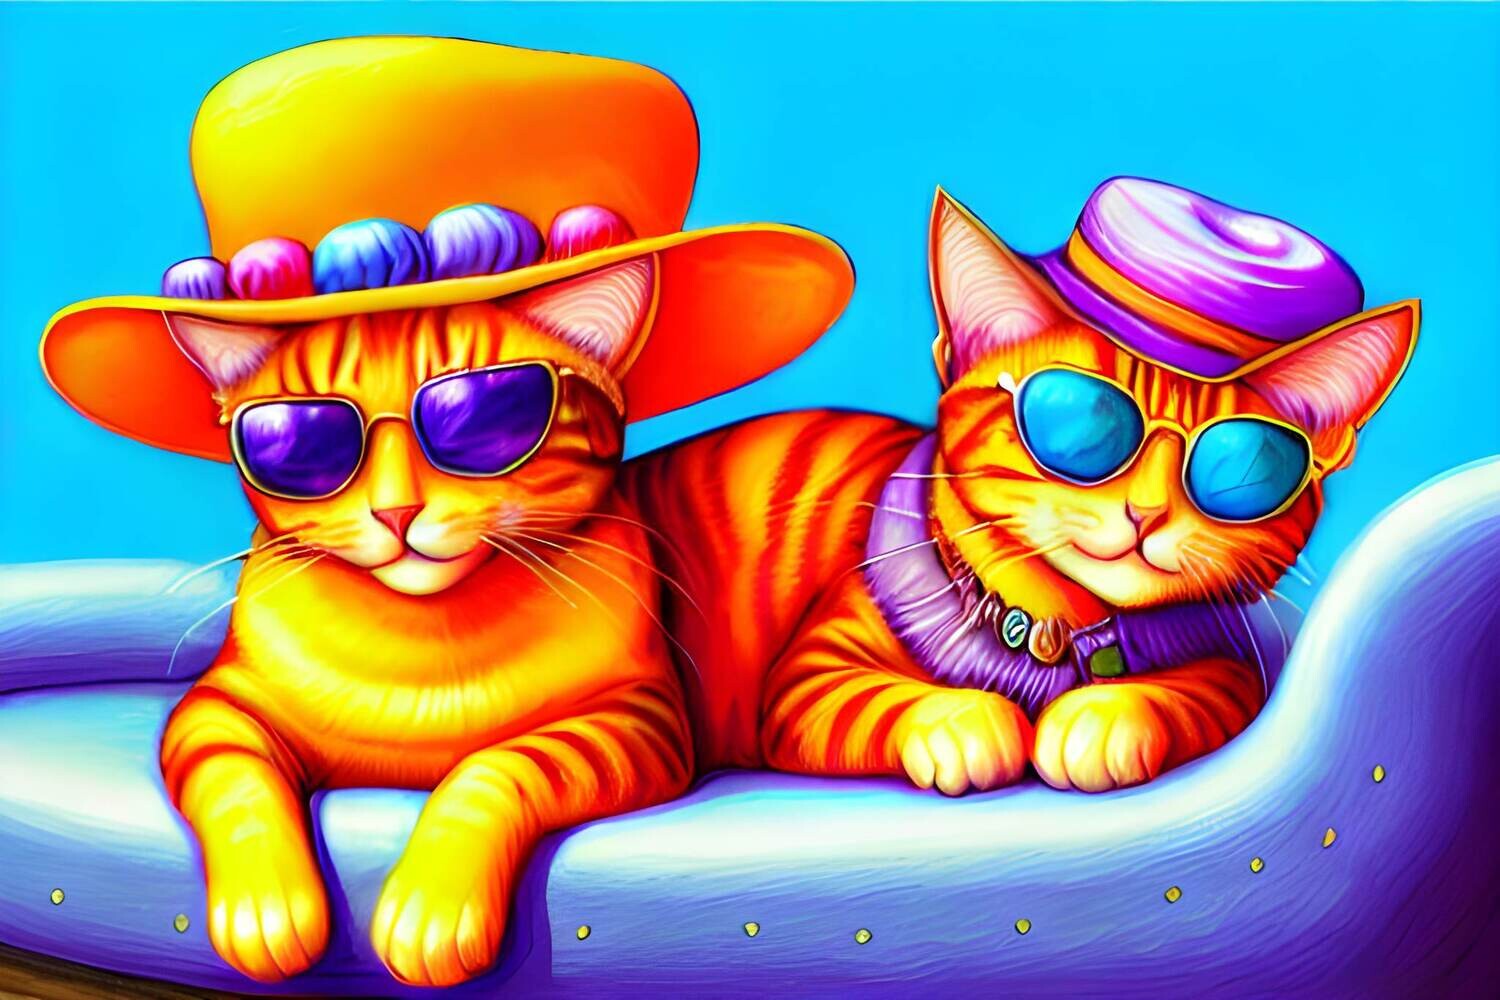 Cool Cats - 30 x 40cm Full Drill (Square) with AB drills - POURED GLUE - Diamond Painting Kit